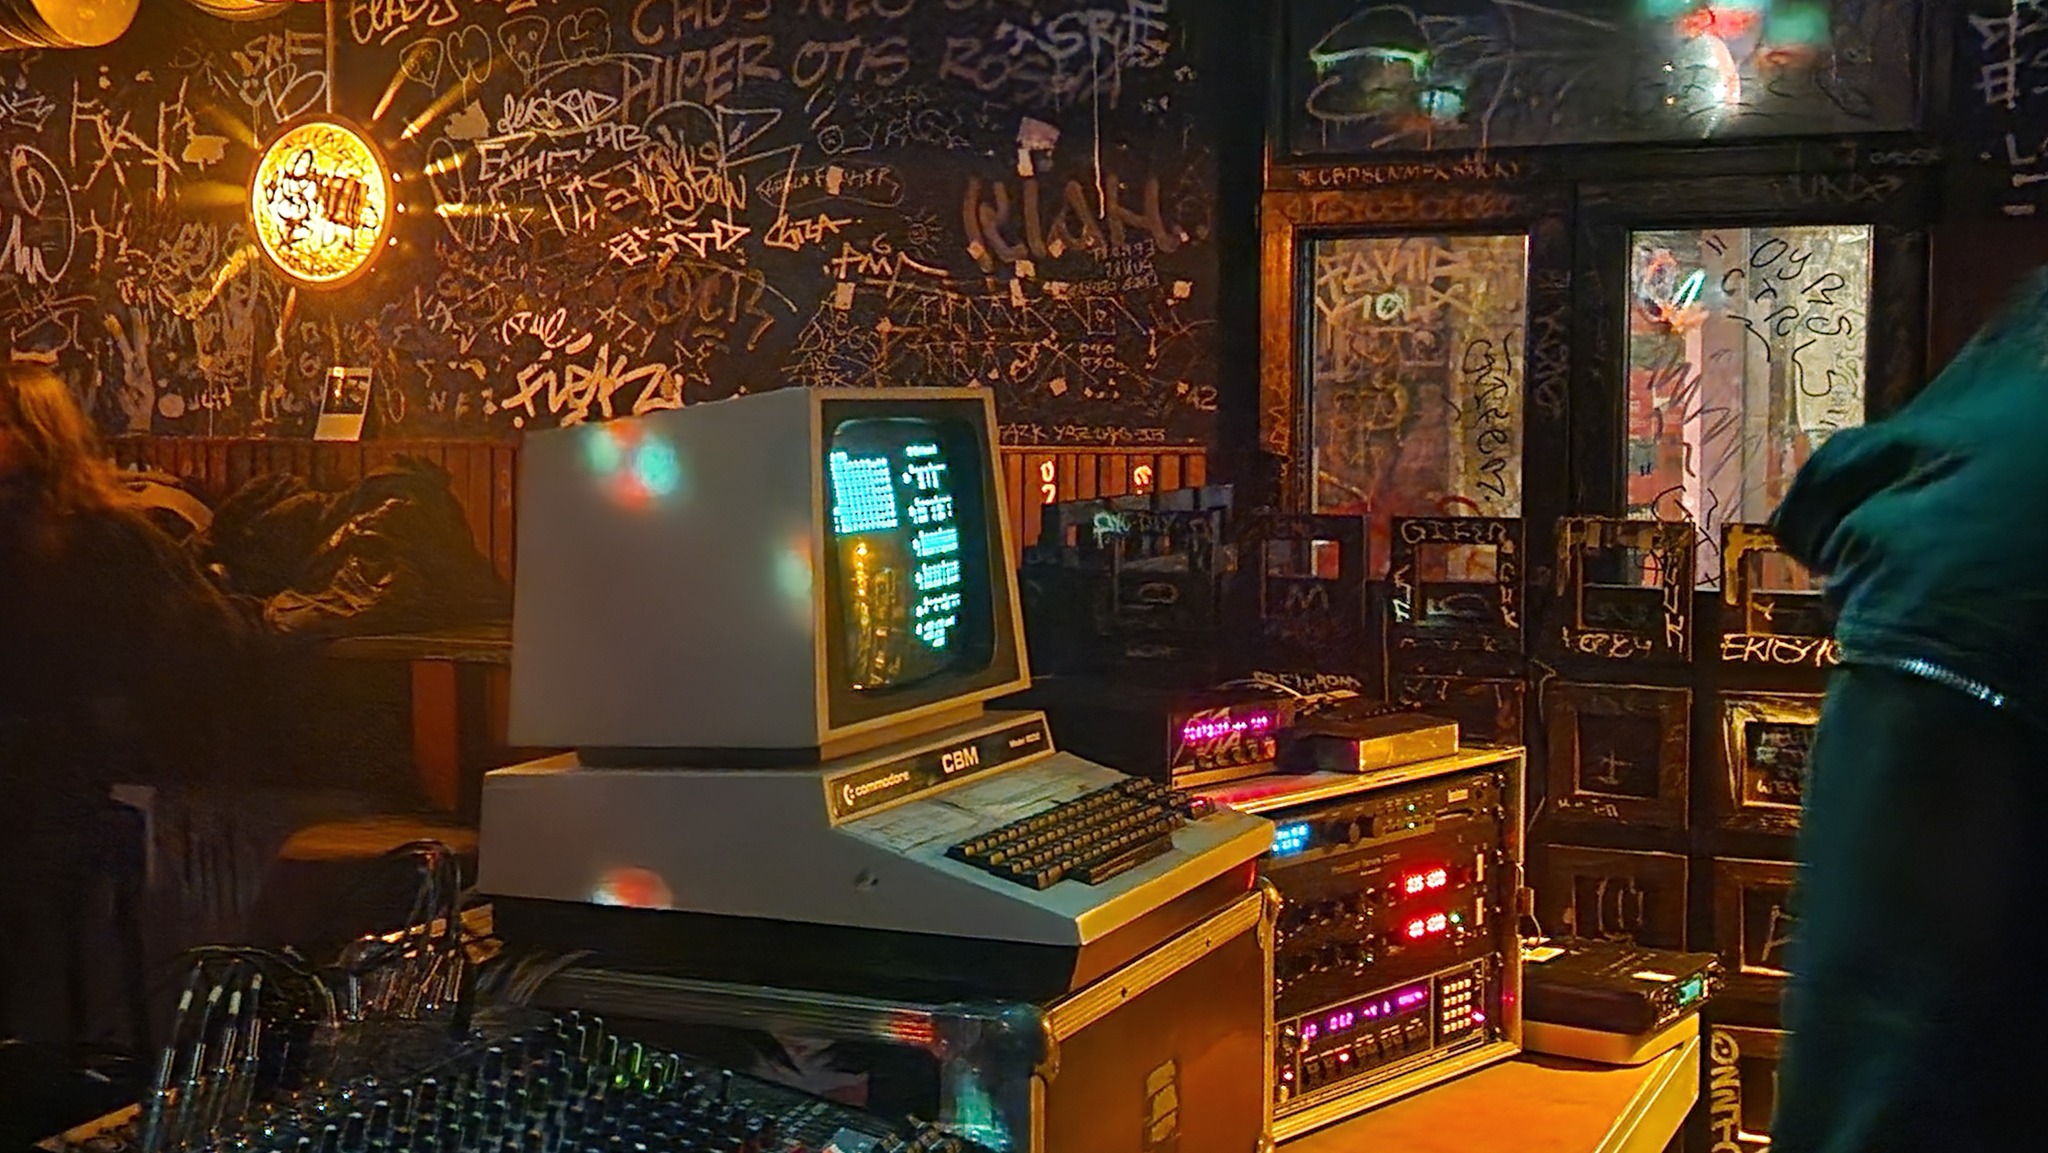 photo of Monolake 8bit performance at Golden Pudel Club in Hamburg, showing a CBM8032 computer running the sequencer and the interior of the club